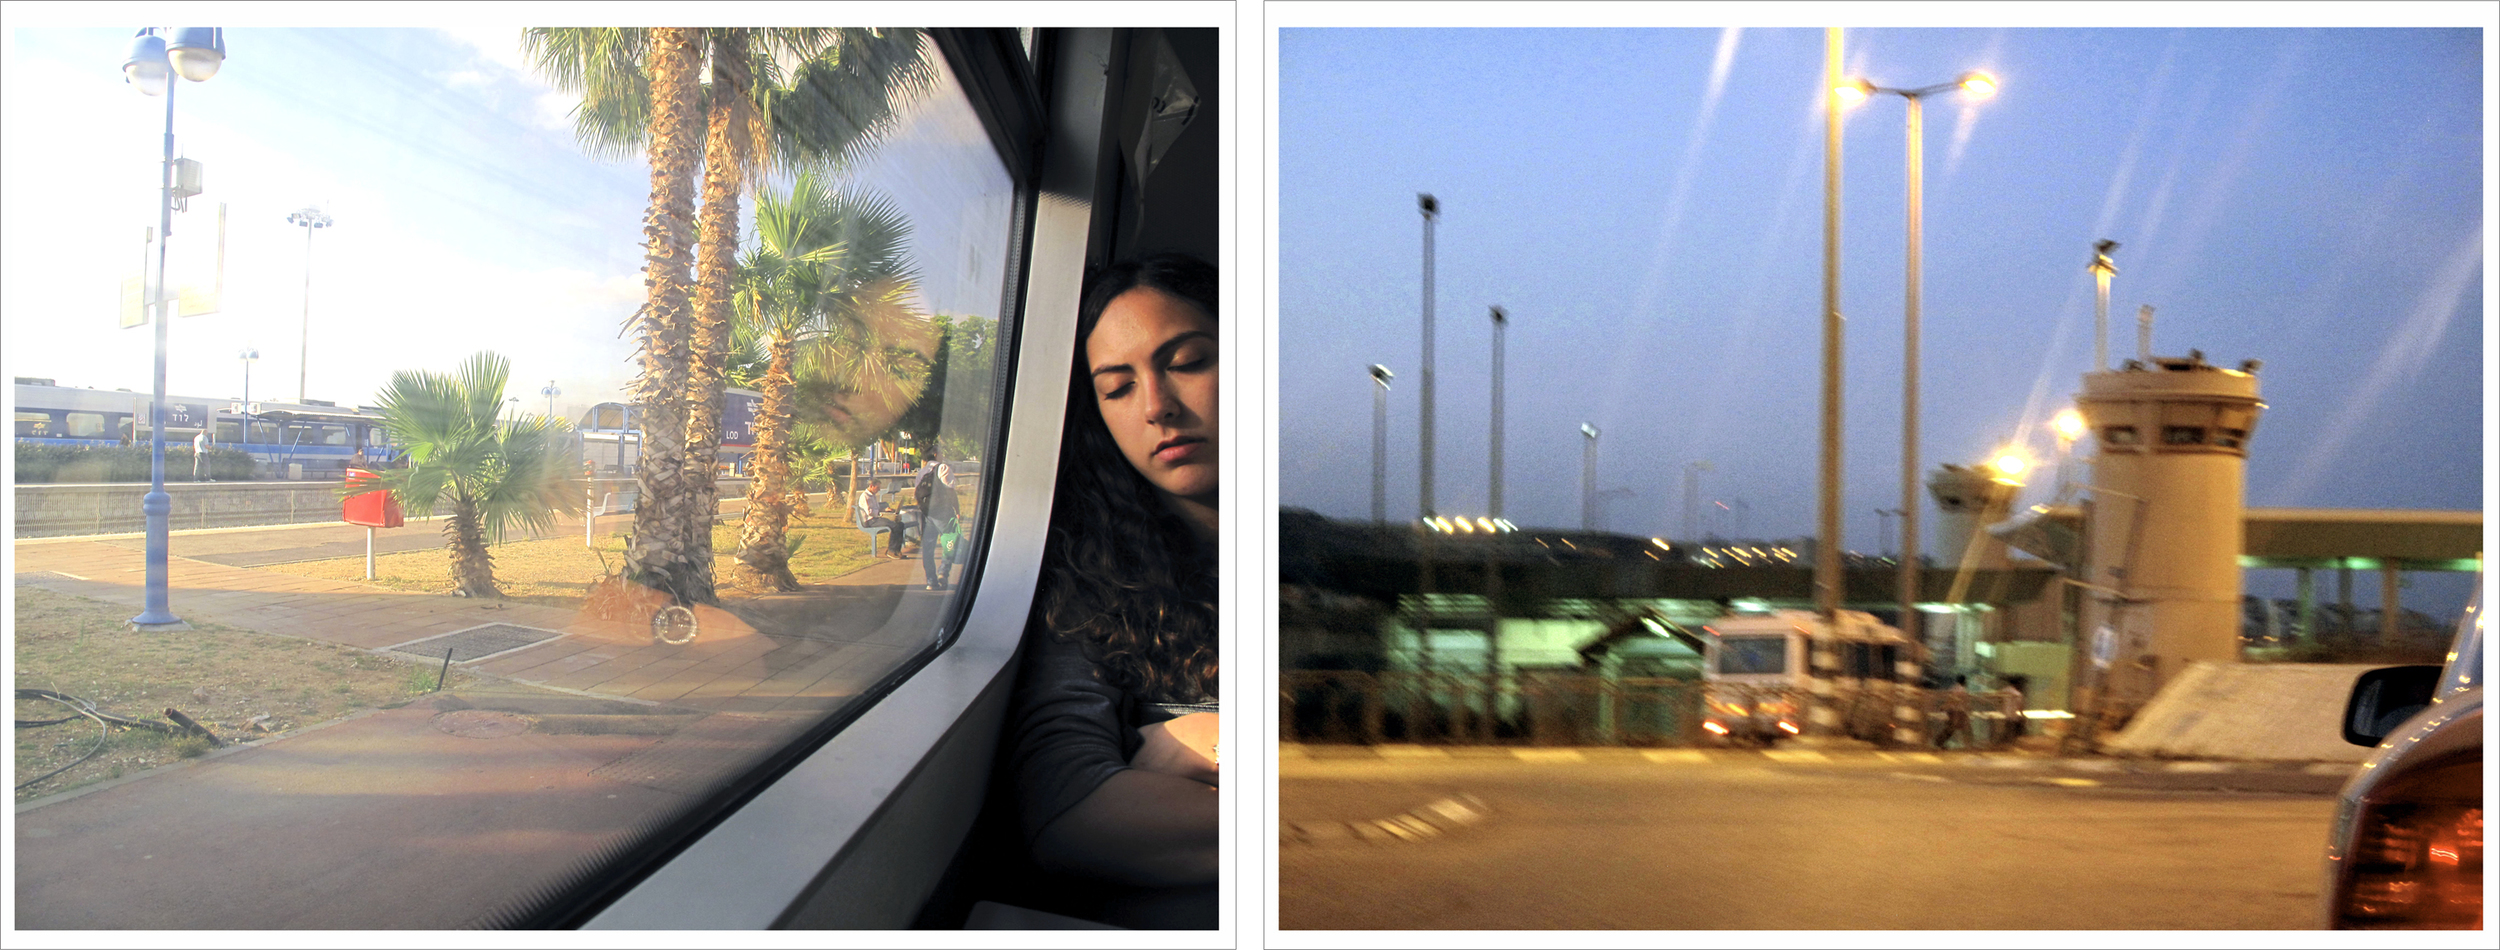  (left) 17:15, May 26, 2013 “Train Stop: Lydda / Lod”. (right) 19:00, May 26, 2013 “Arrival Qalandiya Checkpoint", The West Bank, The Occupied Territories. 